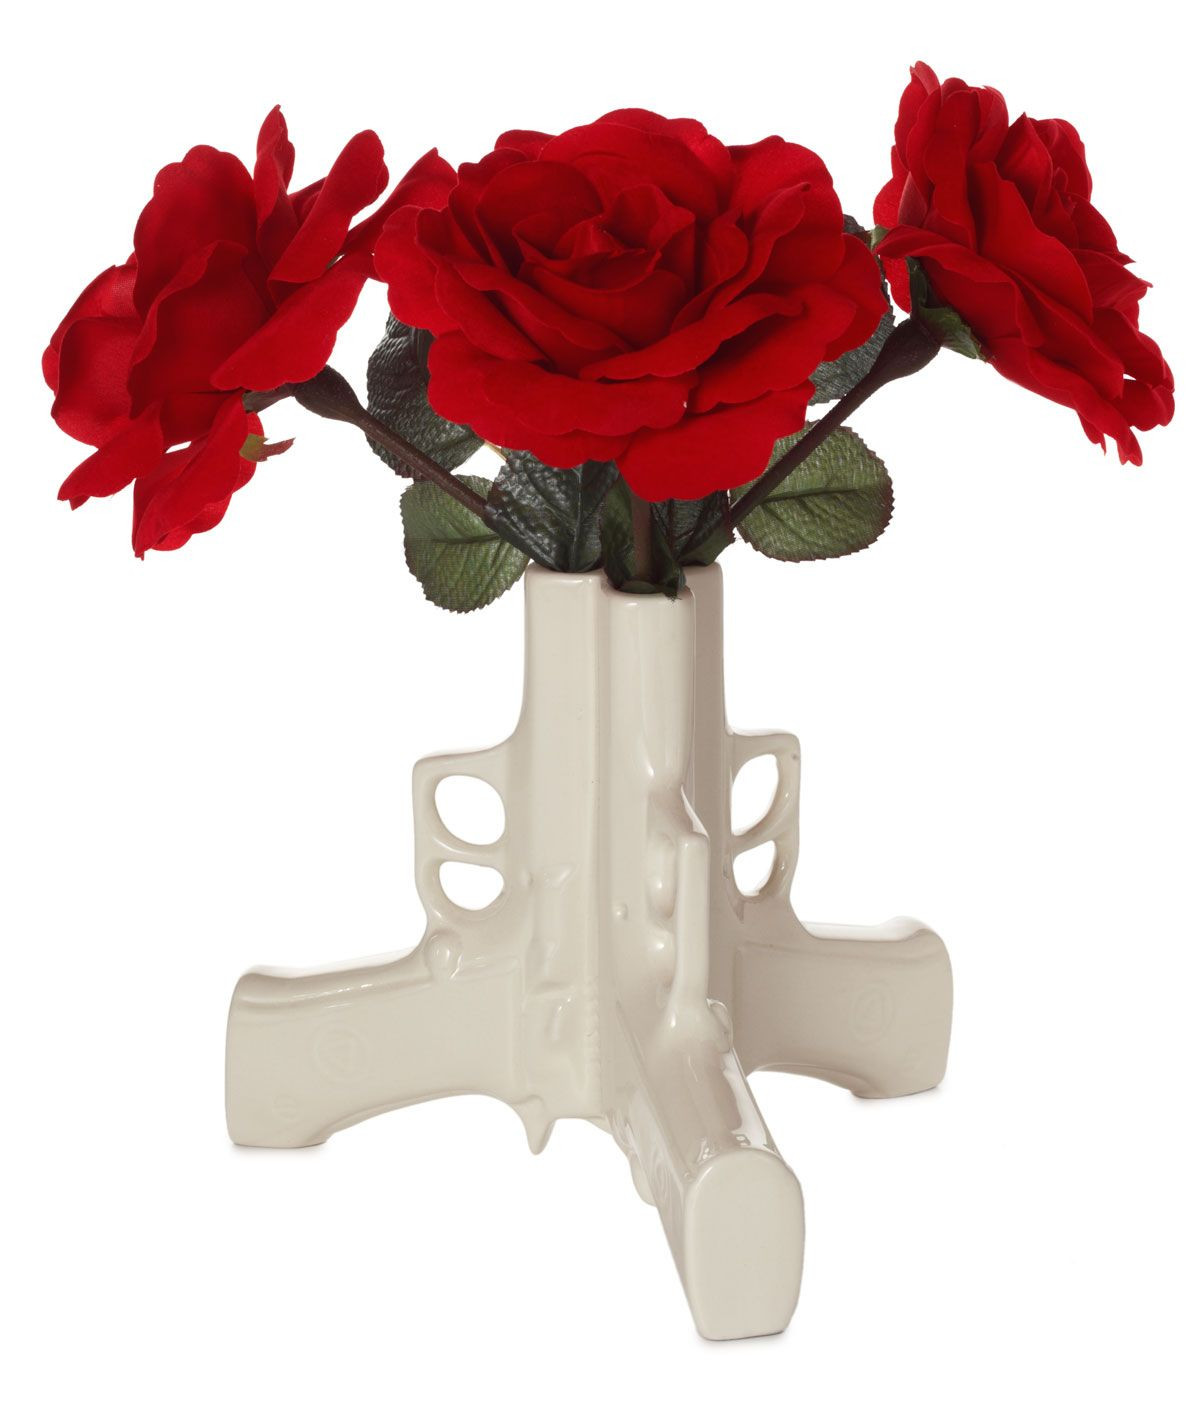 25 Stunning Kate Spade Owl Vase 2024 free download kate spade owl vase of gun flower vase home furnishings accessories pinterest within white ceramic home accessories are all the rage right now and this pistol packin vase means stylish busin